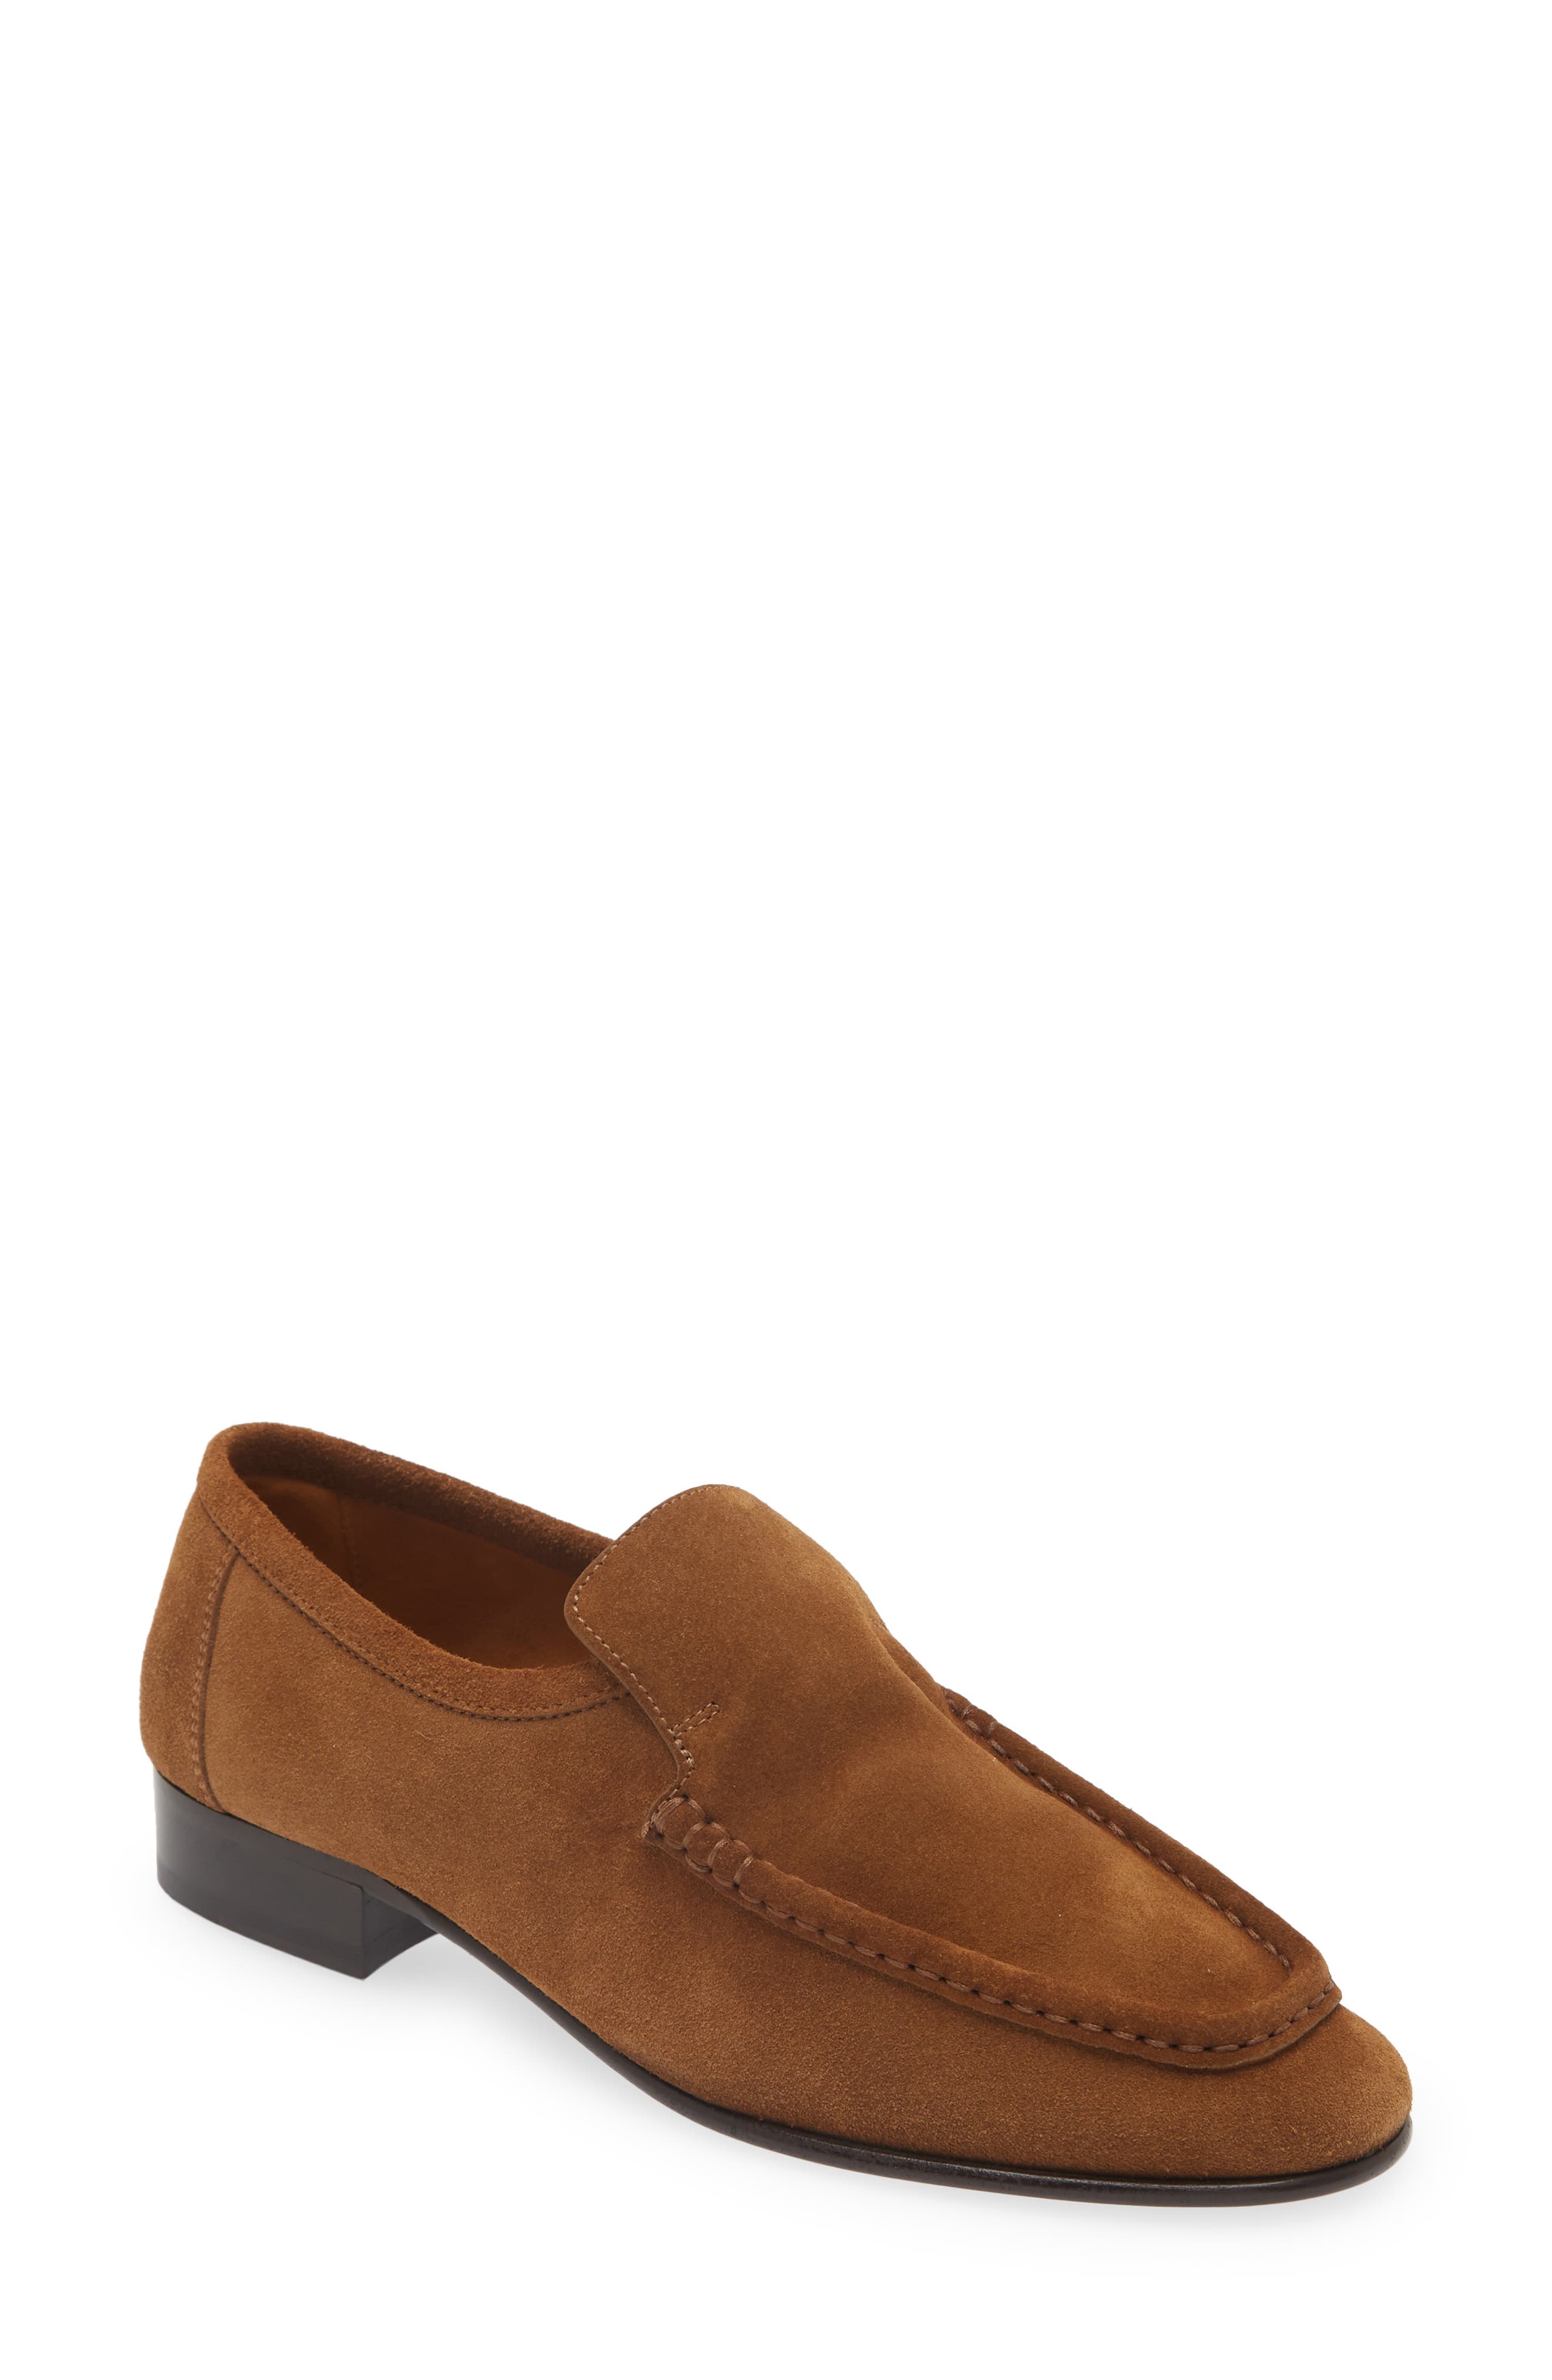 The Row New Soft Loafer in Bark | Smart Closet